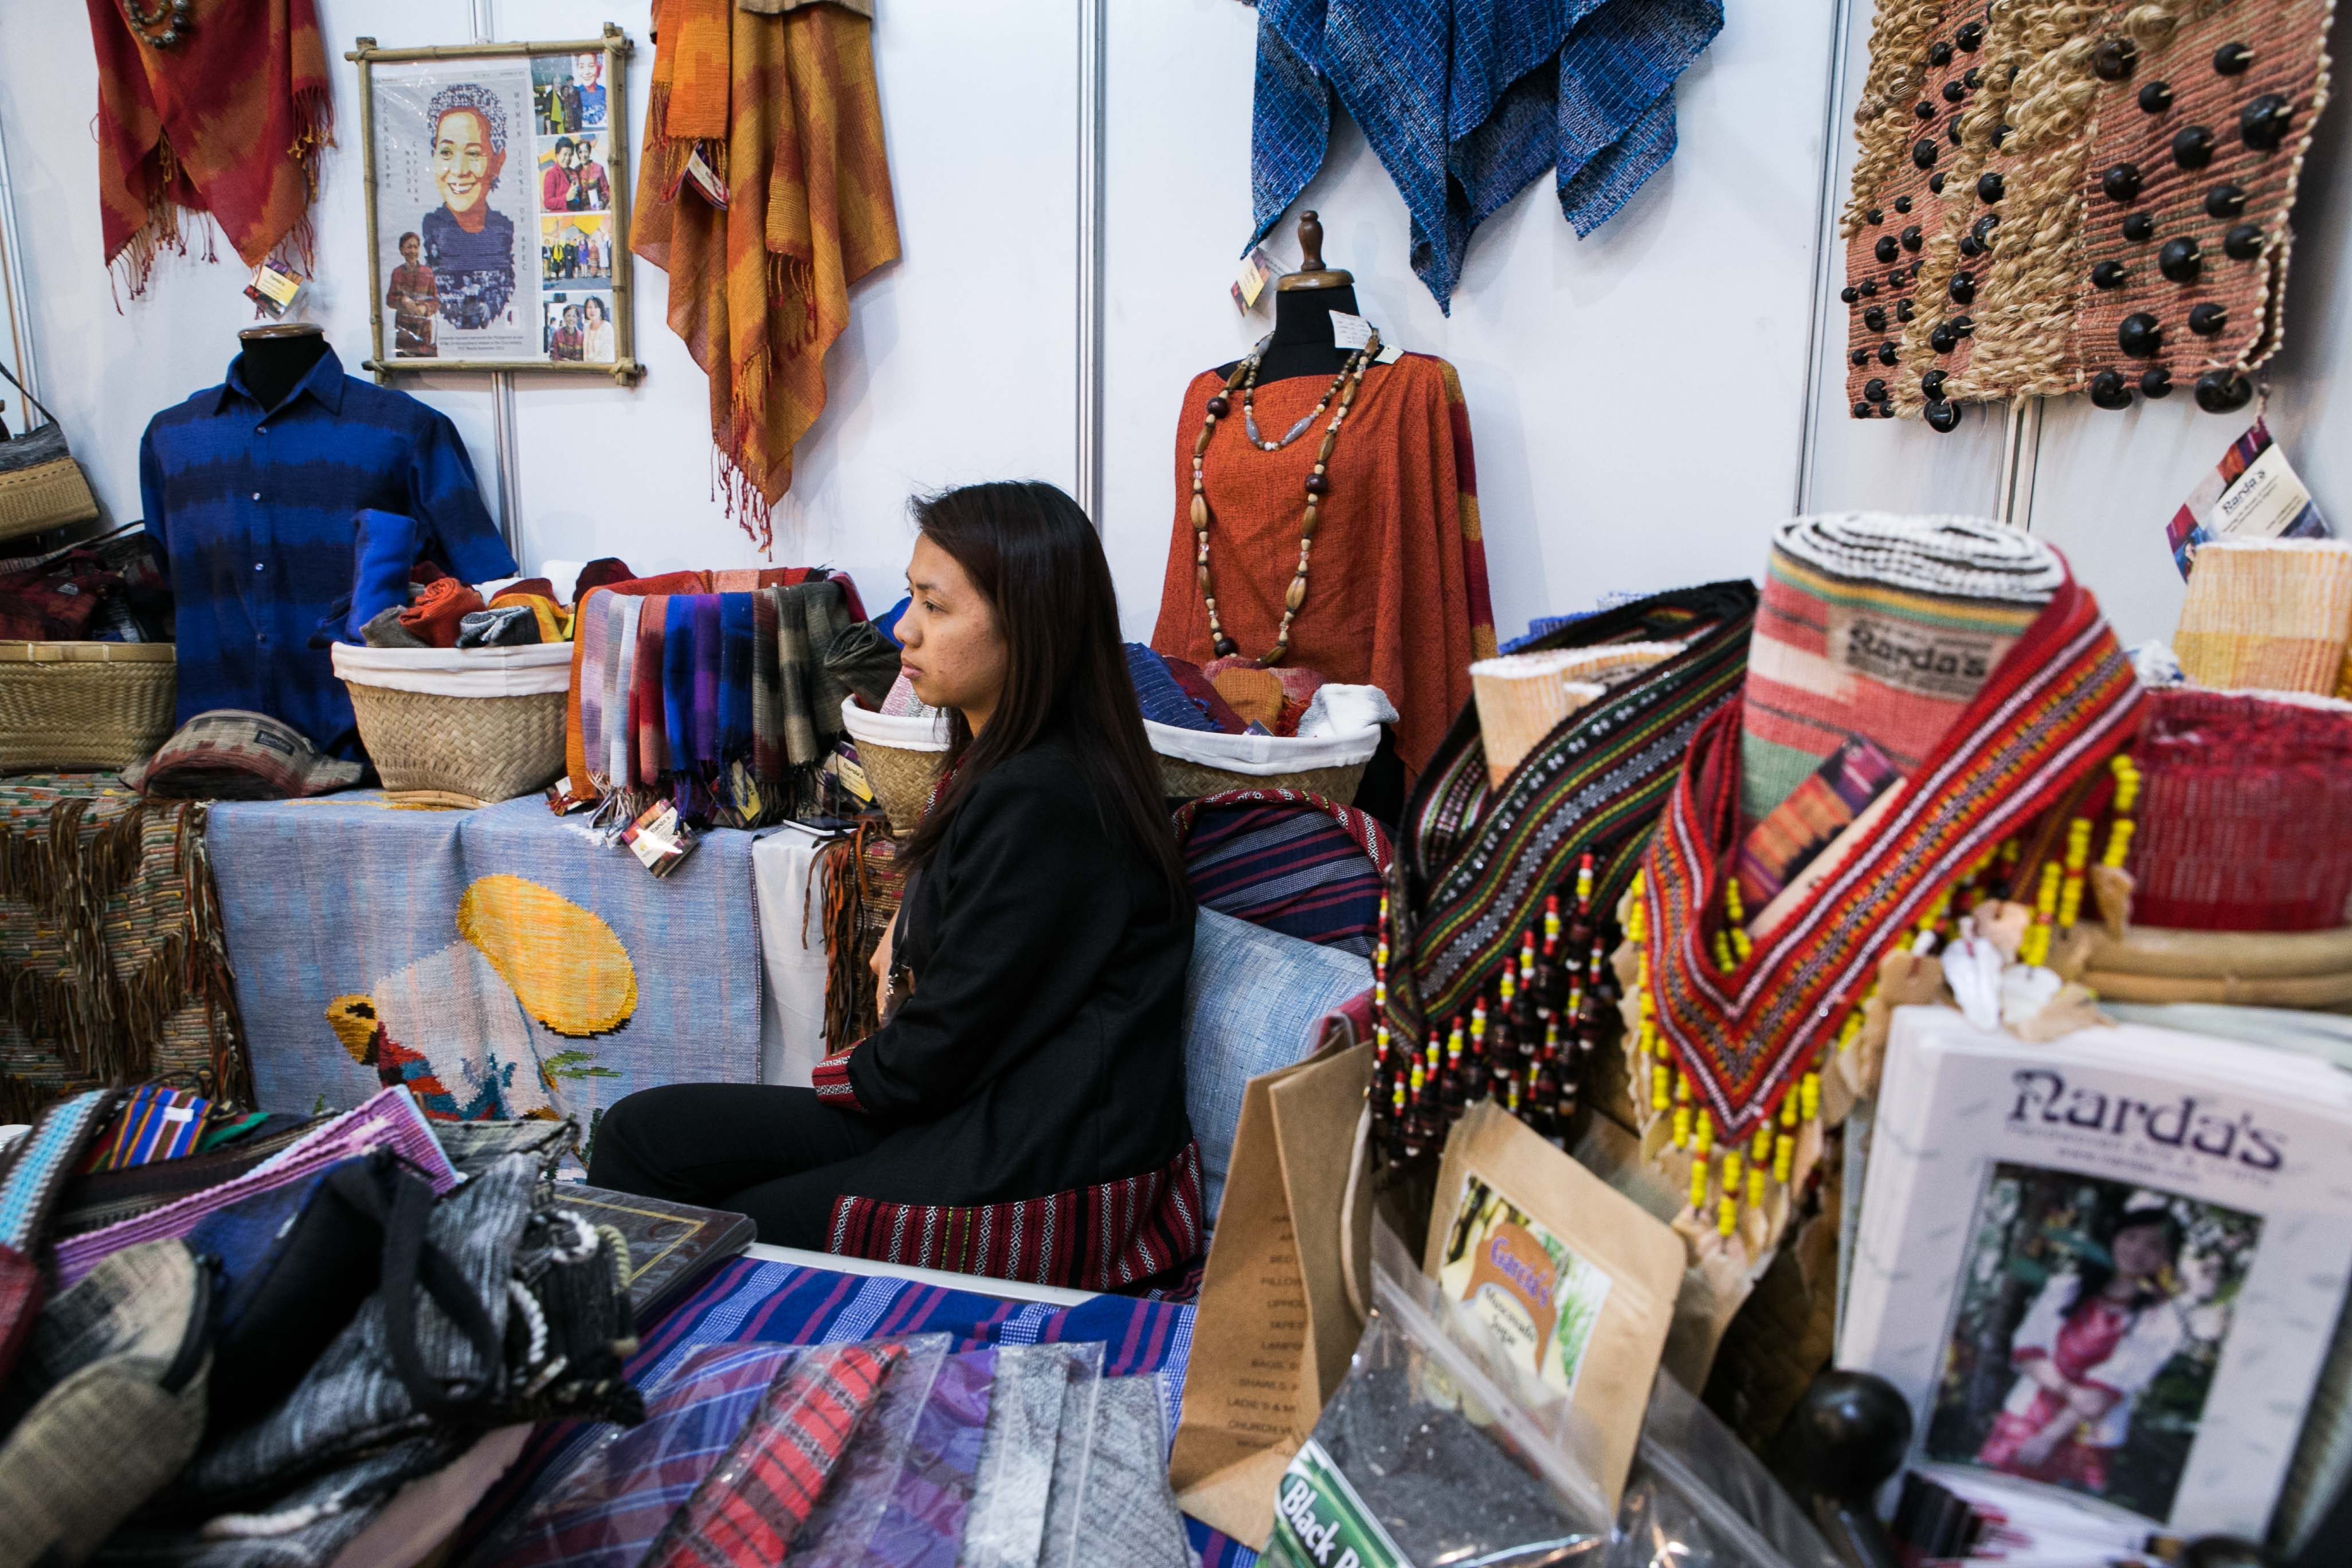 NARDA'S CREATIONS. A stall at the APEC International Media Center also sells traditional wear from the Cordilleras. Photo by Pat Nabong/Rappler